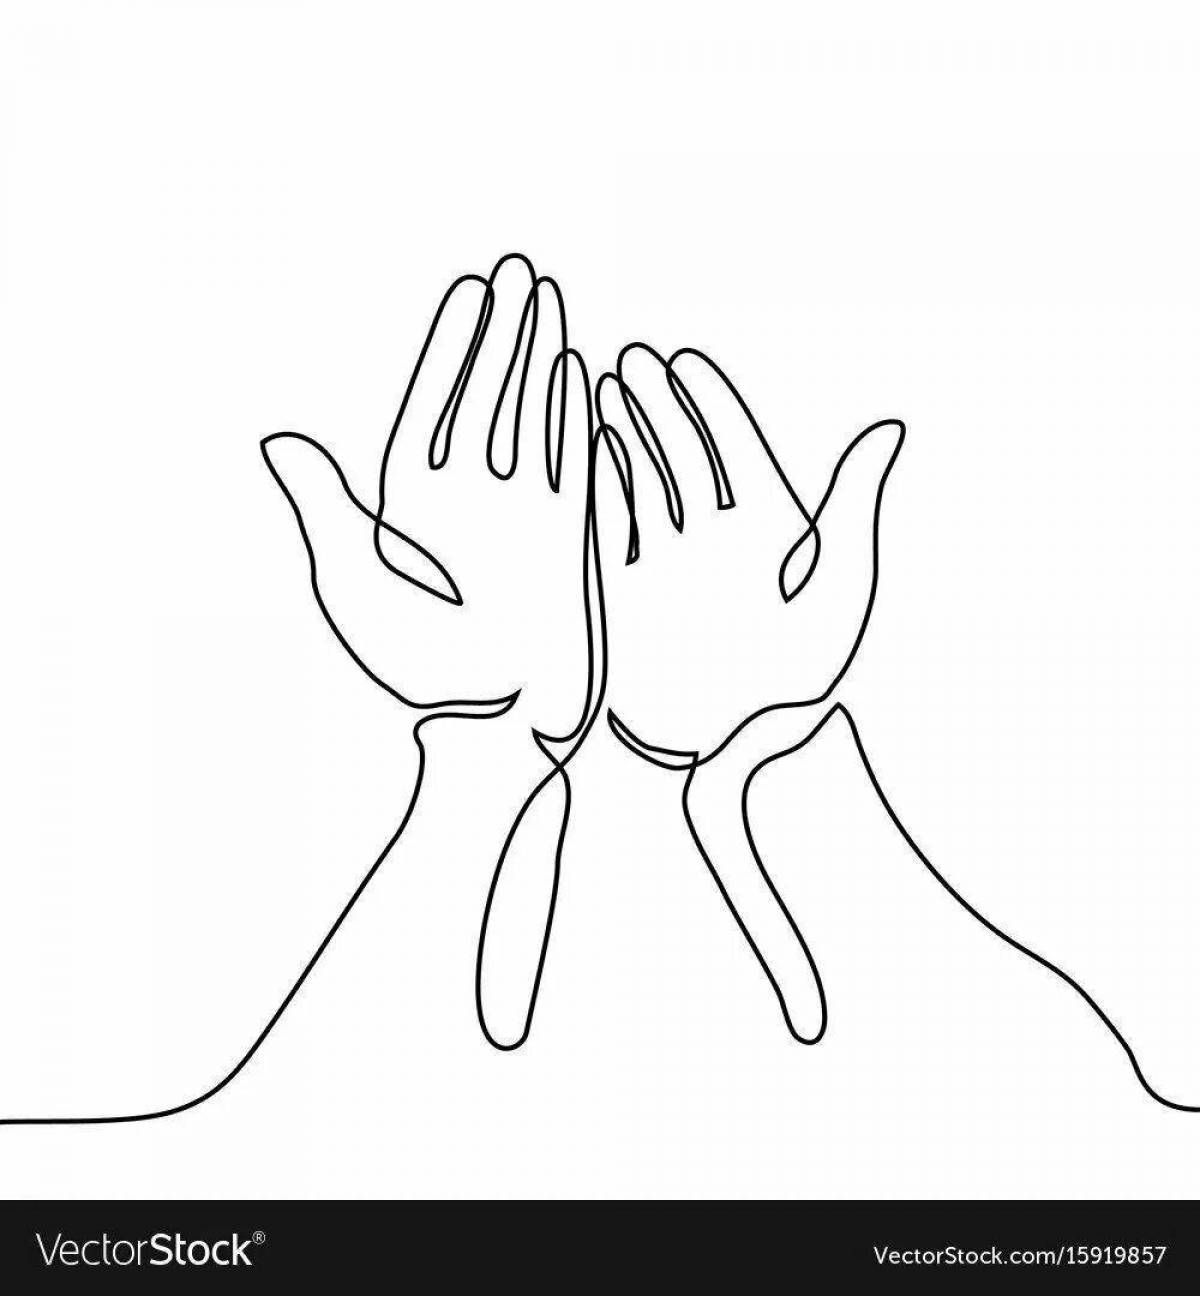 Colorful coloring page 2 hands